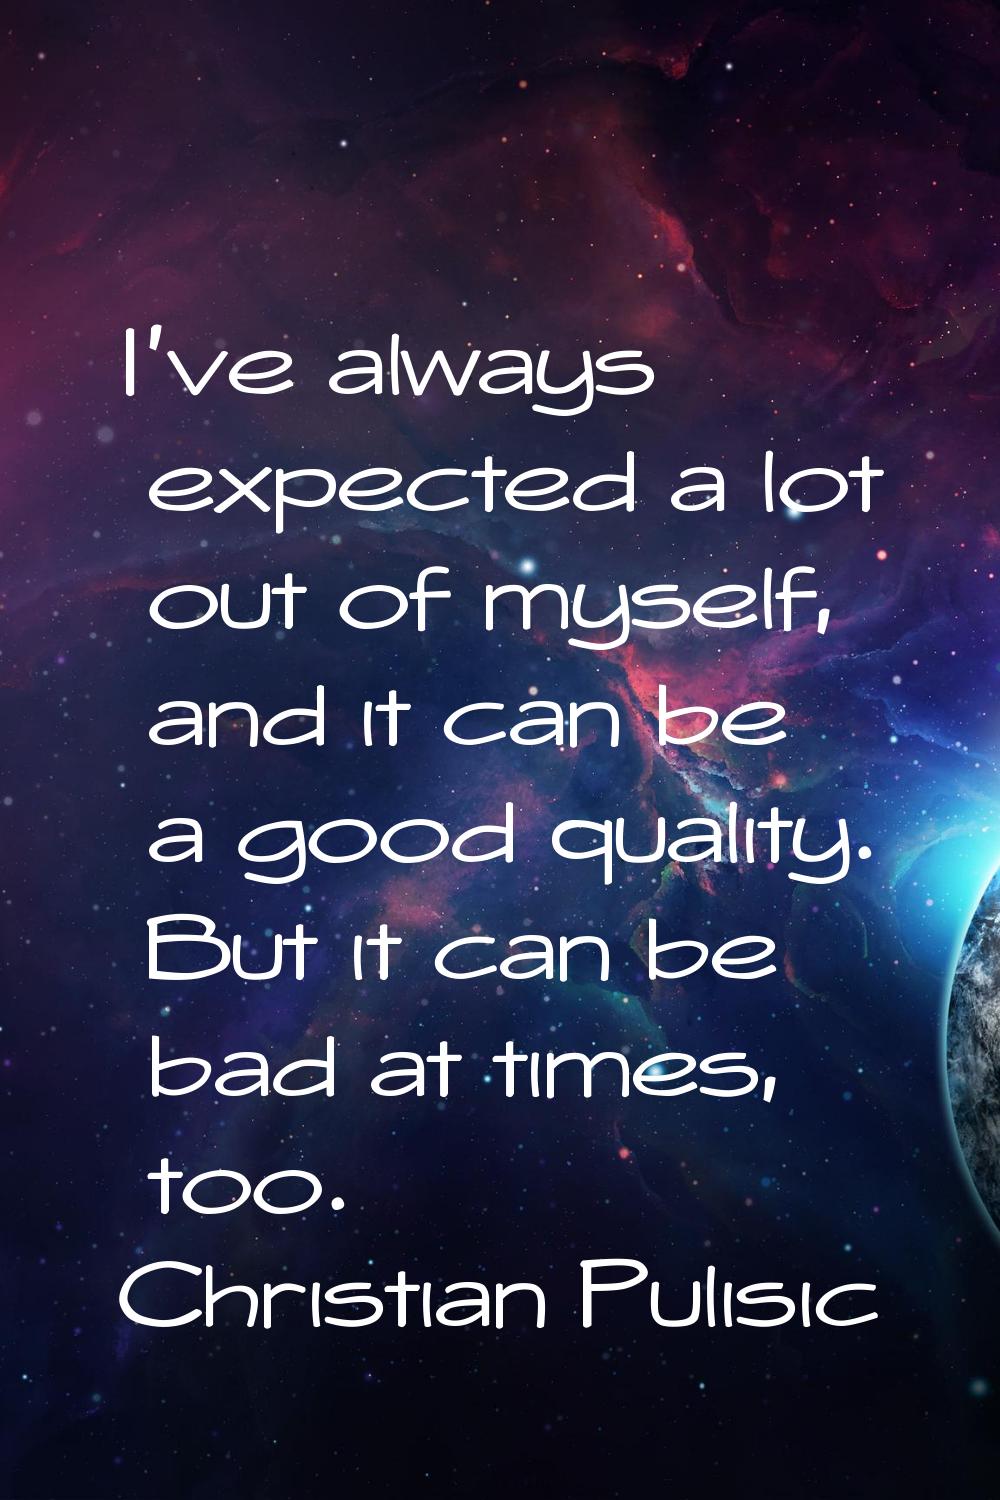 I've always expected a lot out of myself, and it can be a good quality. But it can be bad at times,